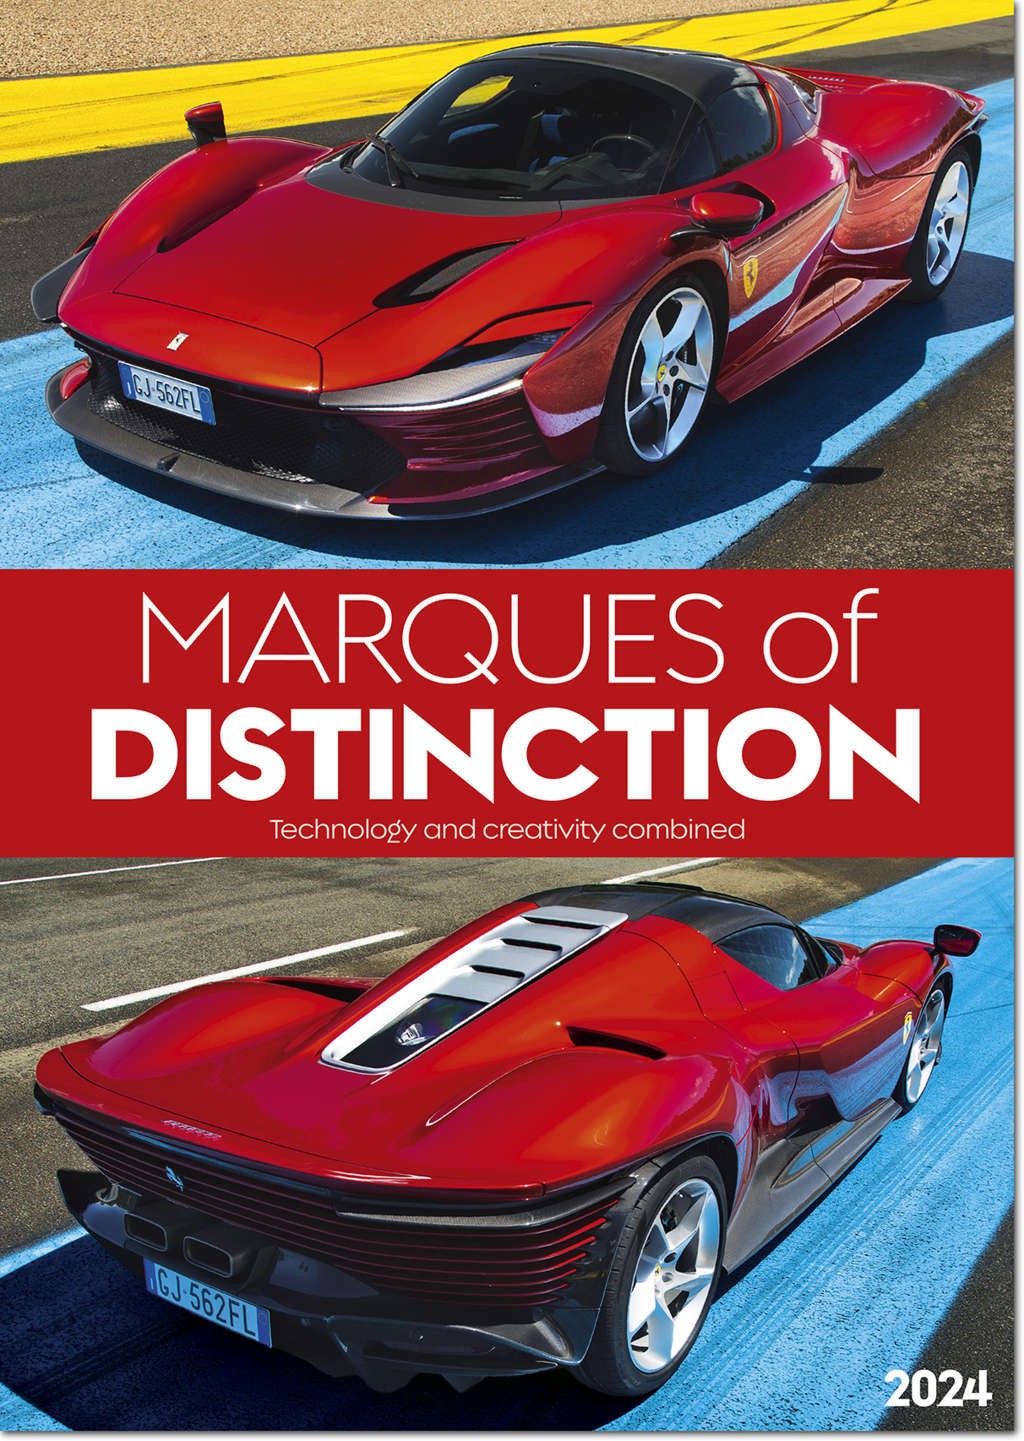 Marques of Distinction